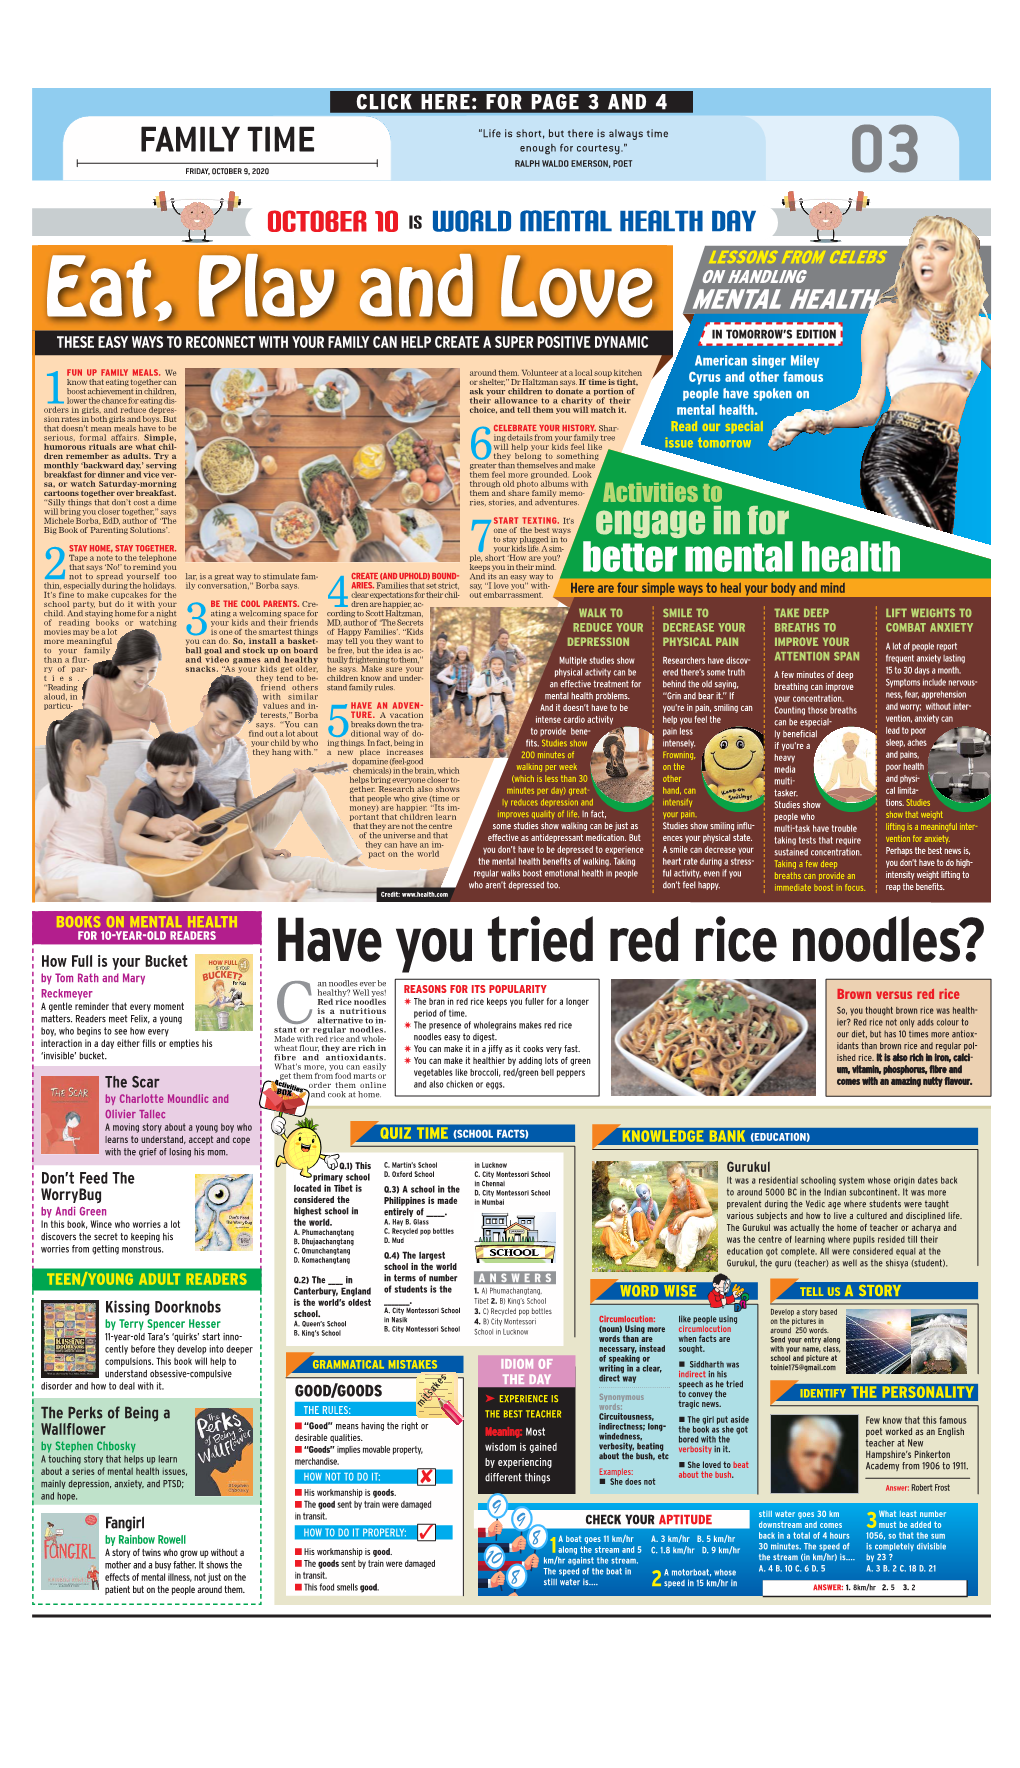 Have You Tried Red Rice Noodles?